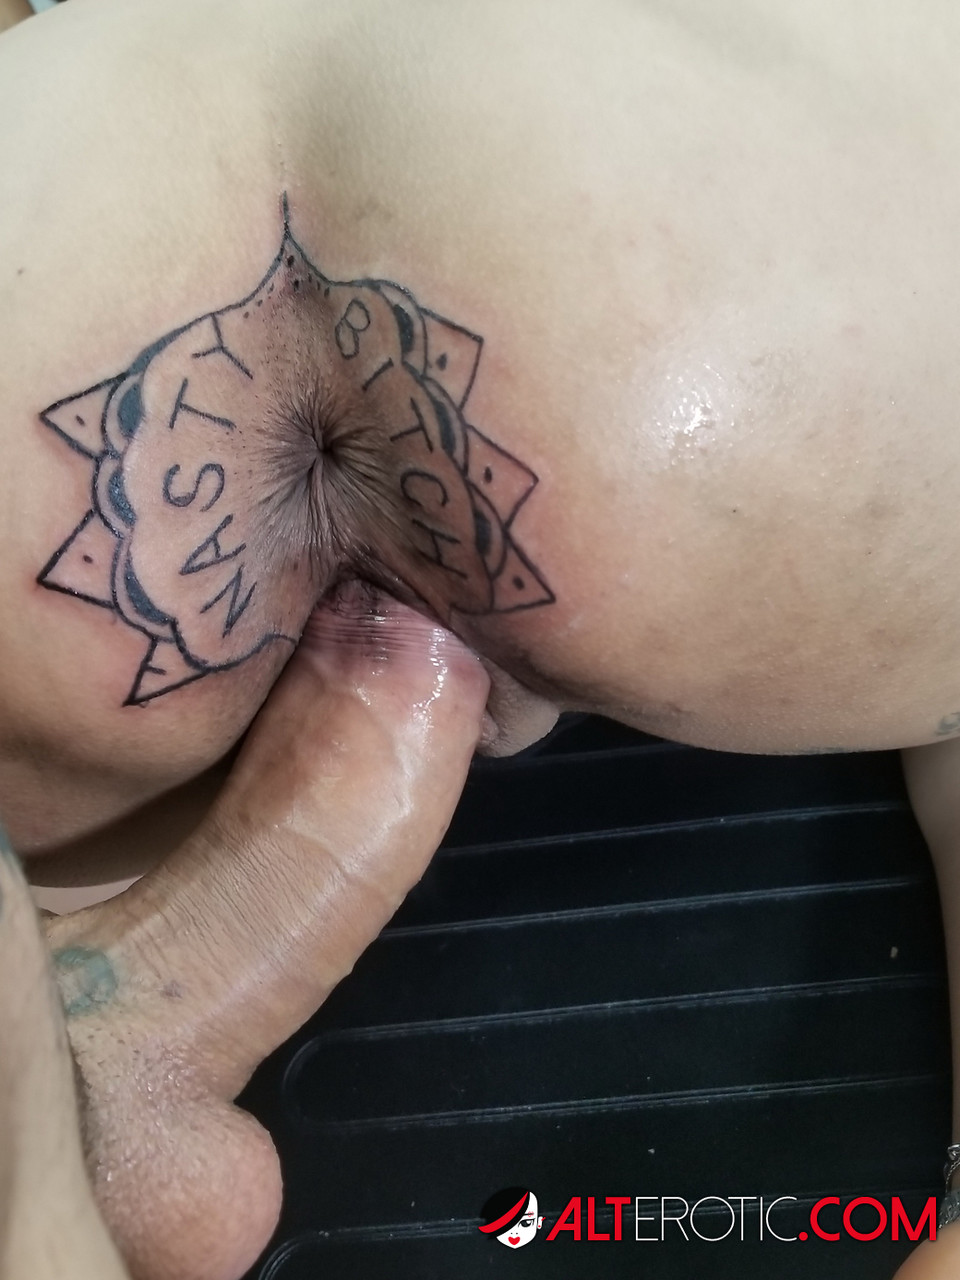 Latina chick Kitty Jaguar gets a butt tattoo before being fucked zdjęcie porno #424168461 | Alt Erotic Pics, Kitty Jaguar, Tattoo, mobilne porno